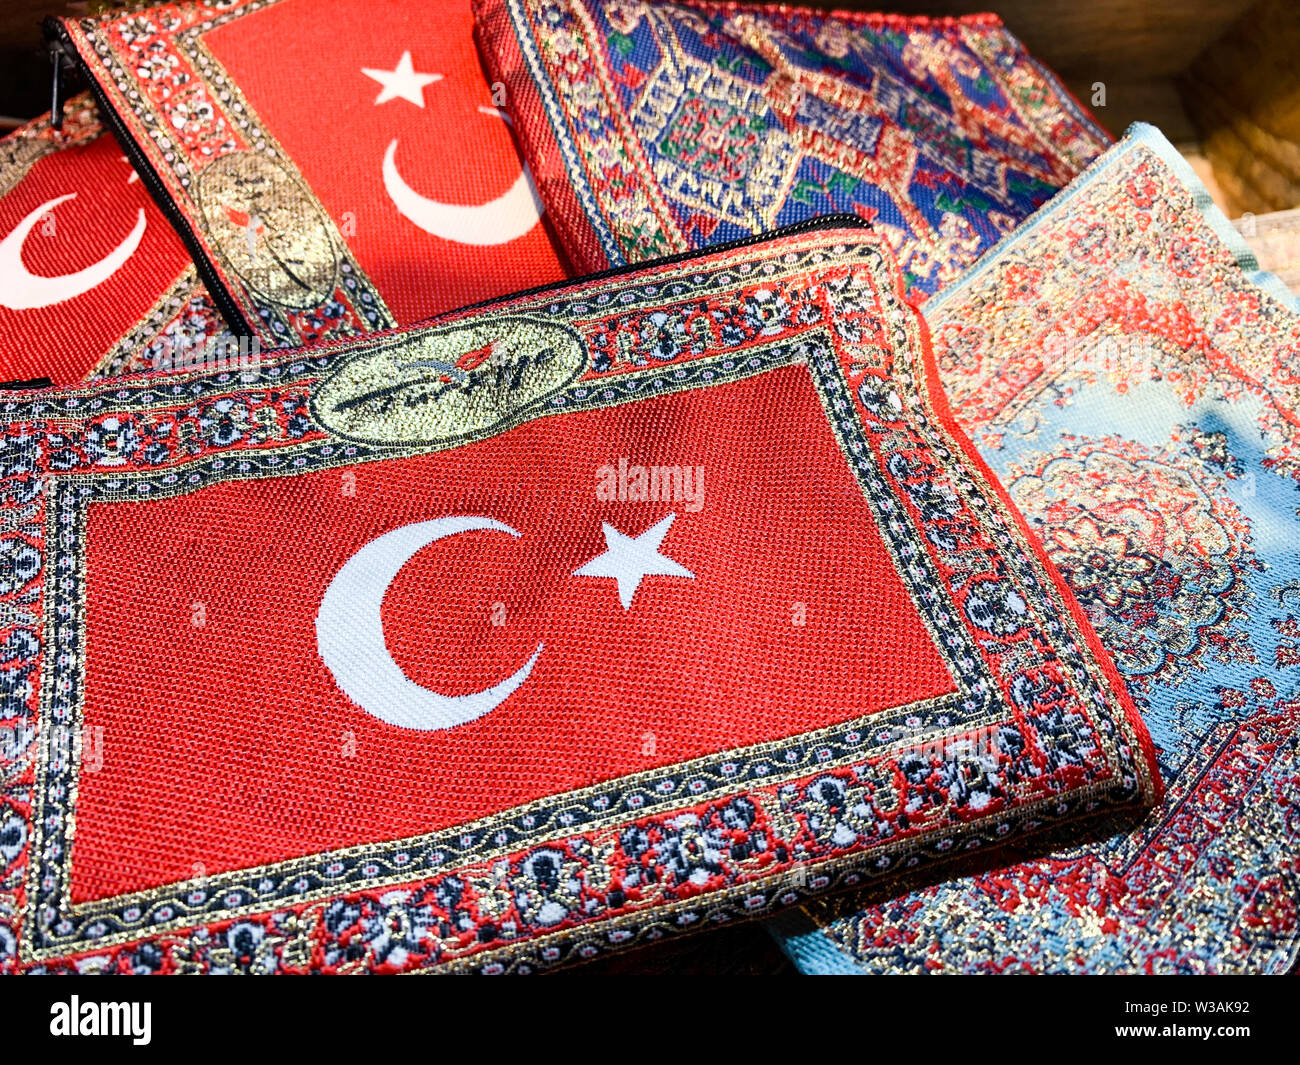 Turkiye is Turkish for the country Turkey. A typical carpet souvenir with the Turkish flag on it to take home from vacation. Stock Photo